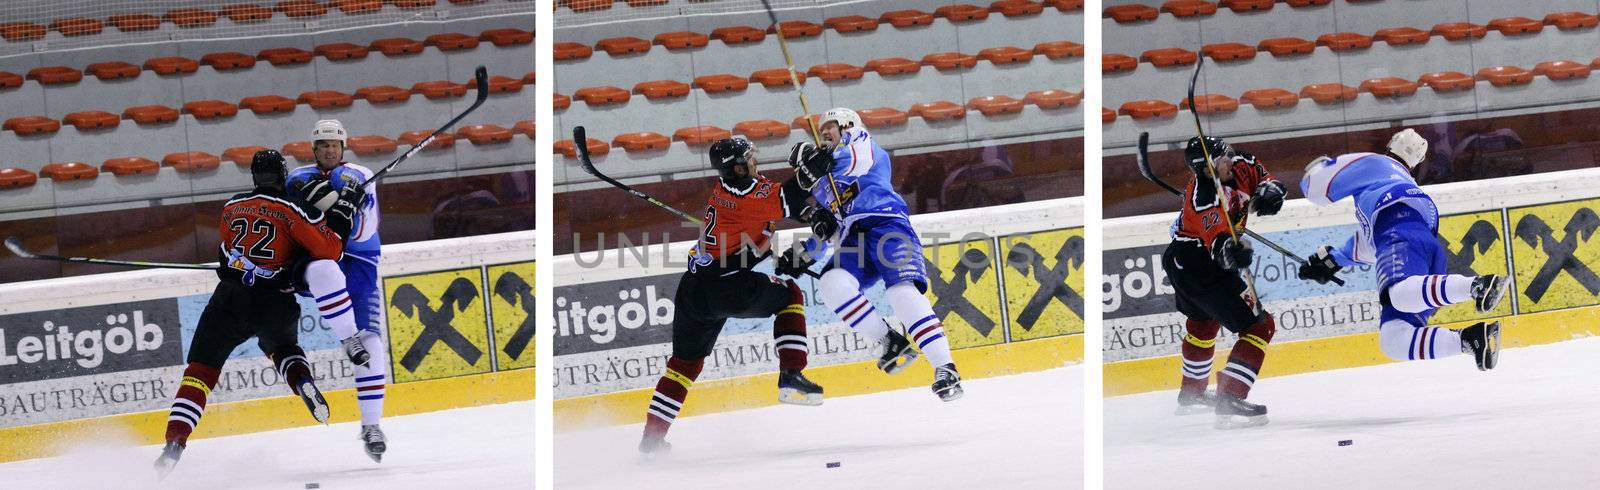 ZELL AM SEE, AUSTRIA - FEB 13: Salzburg hockey League. Markus Ralser crosschecks Morzg player an get ejected from the game. Game SV Schuttdorf vs HCS Morzg  (Result 9-3) on February 13, 2011 at the hockey rink of Zell am See